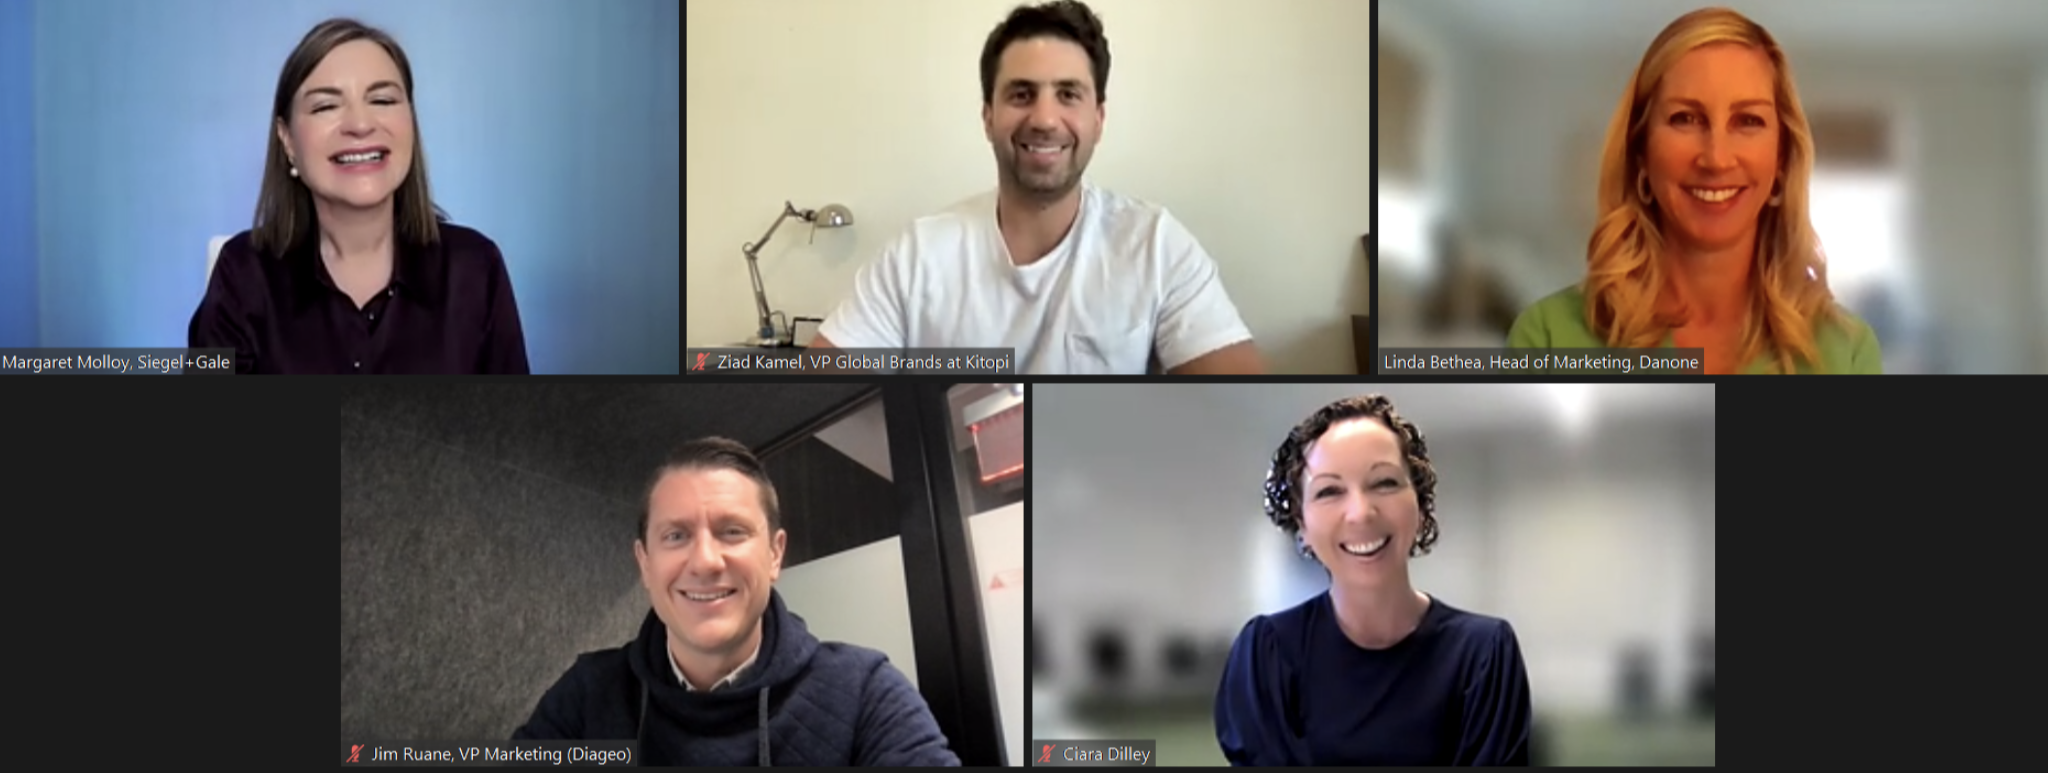 Siegel + Gale's Global CMO, Margaret Molloy, on a video call with 4 marketing executives on the future of sustainability